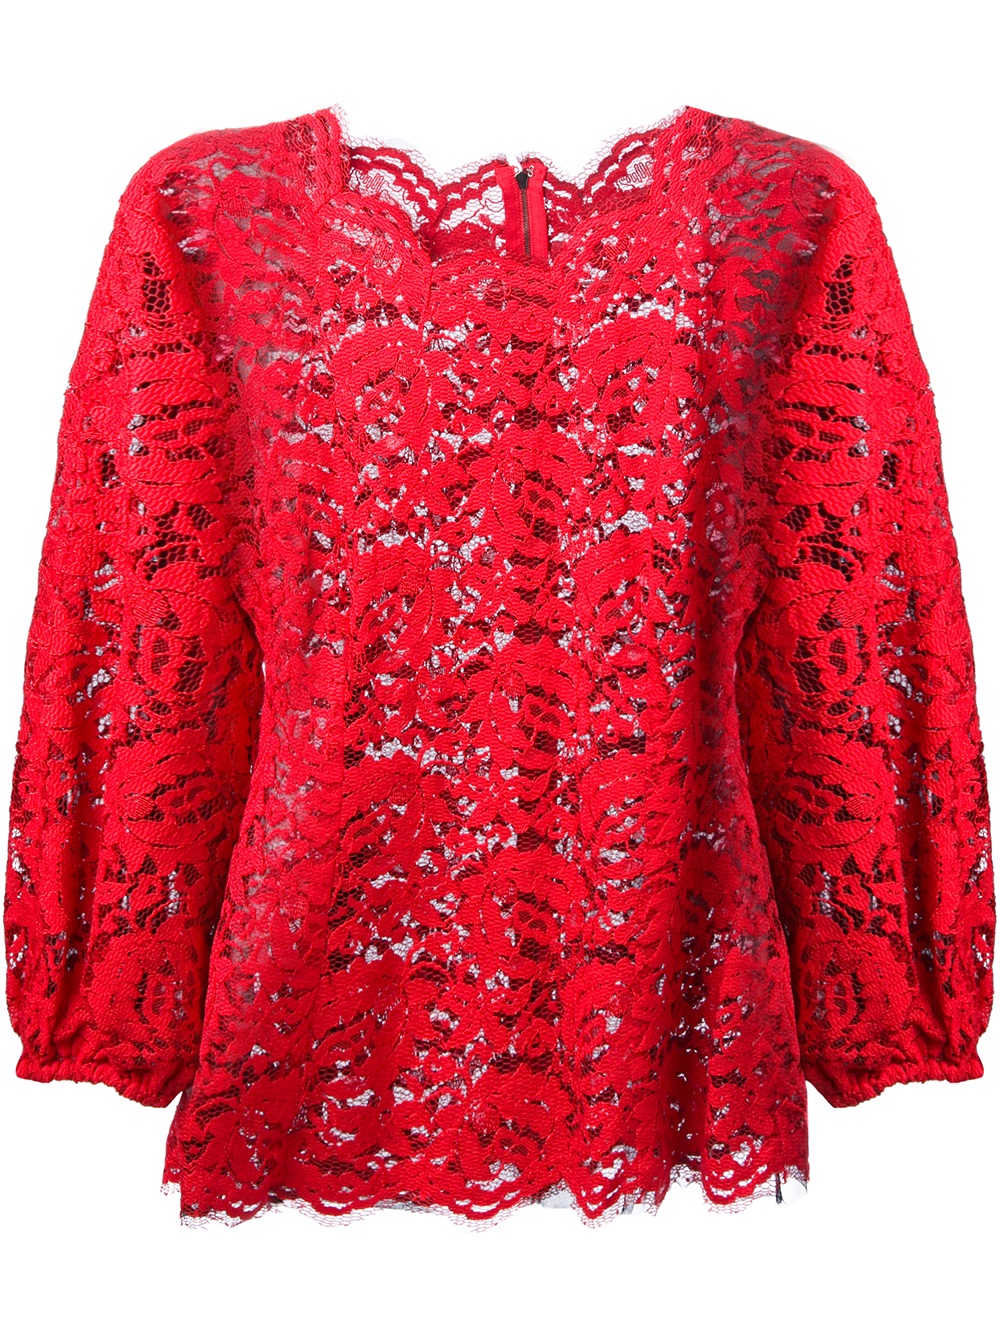 Dolce & gabbana Lace Blouse in Red | Lyst